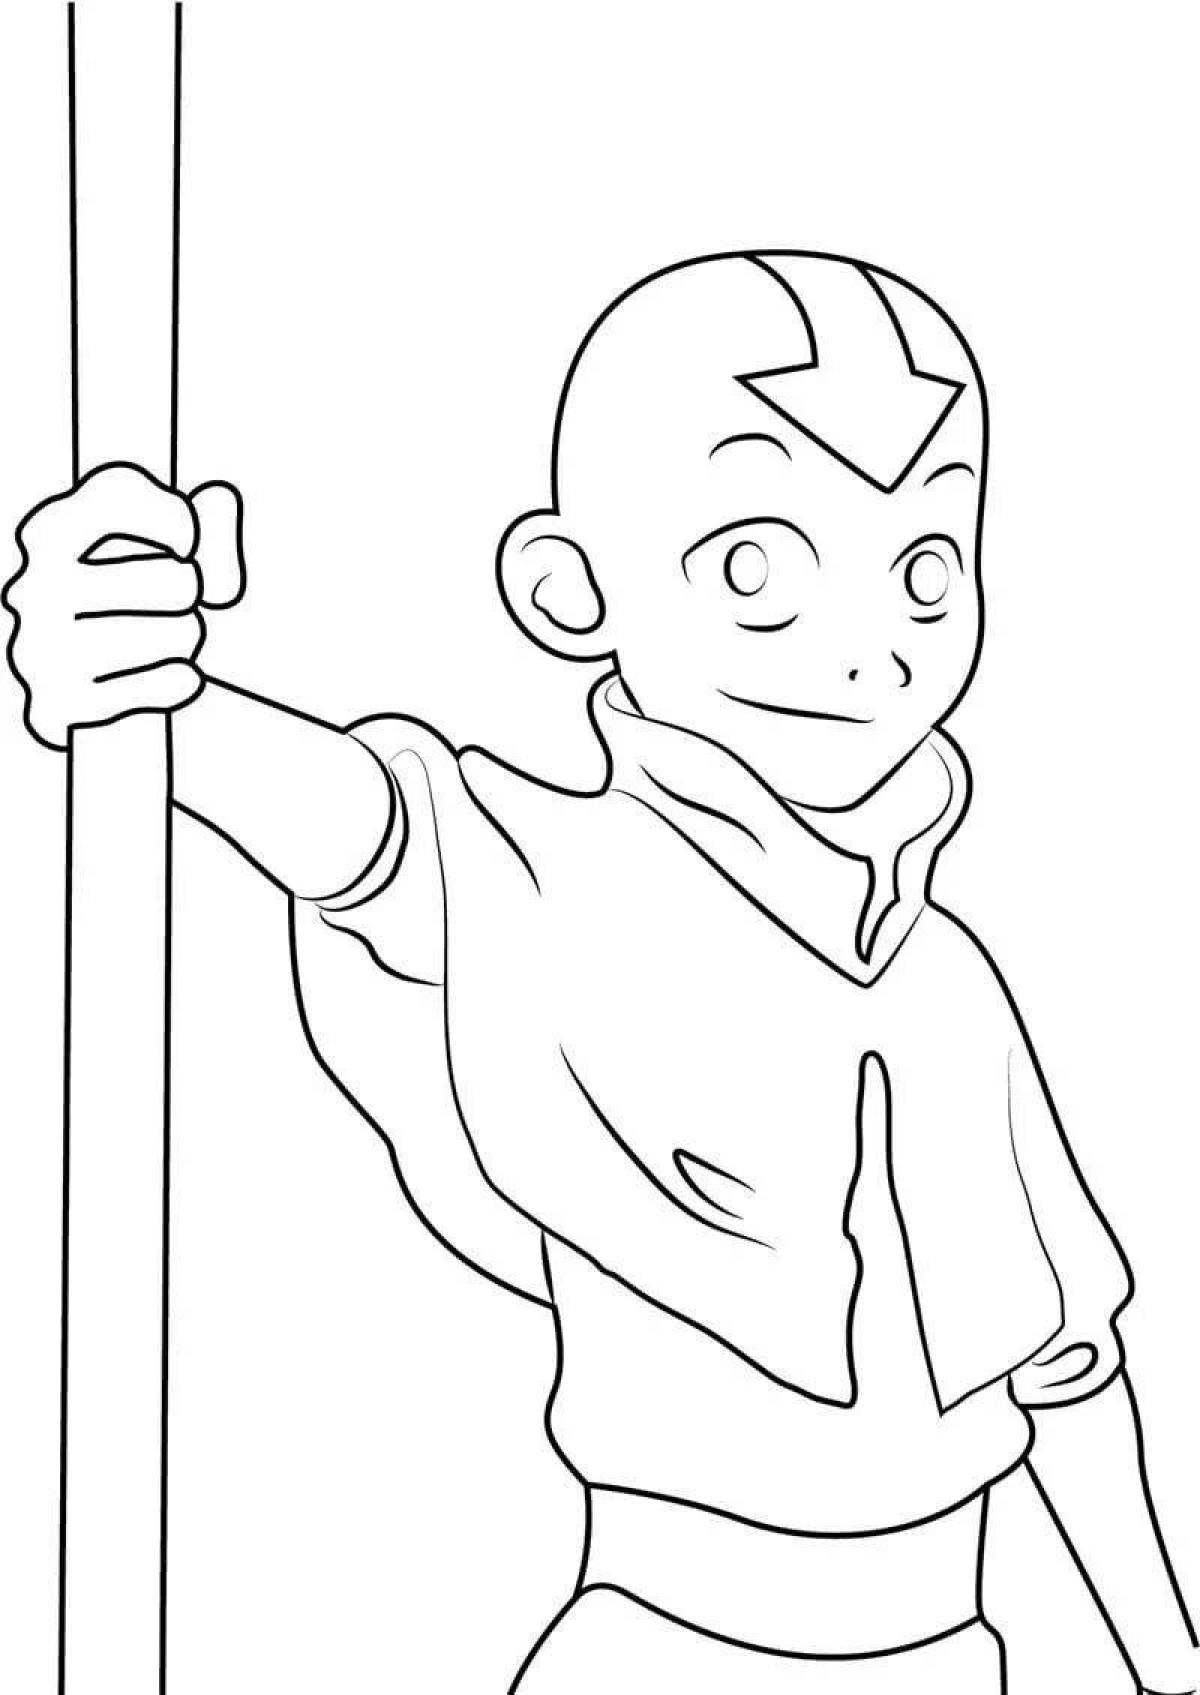 Coloring fairy avatar aang